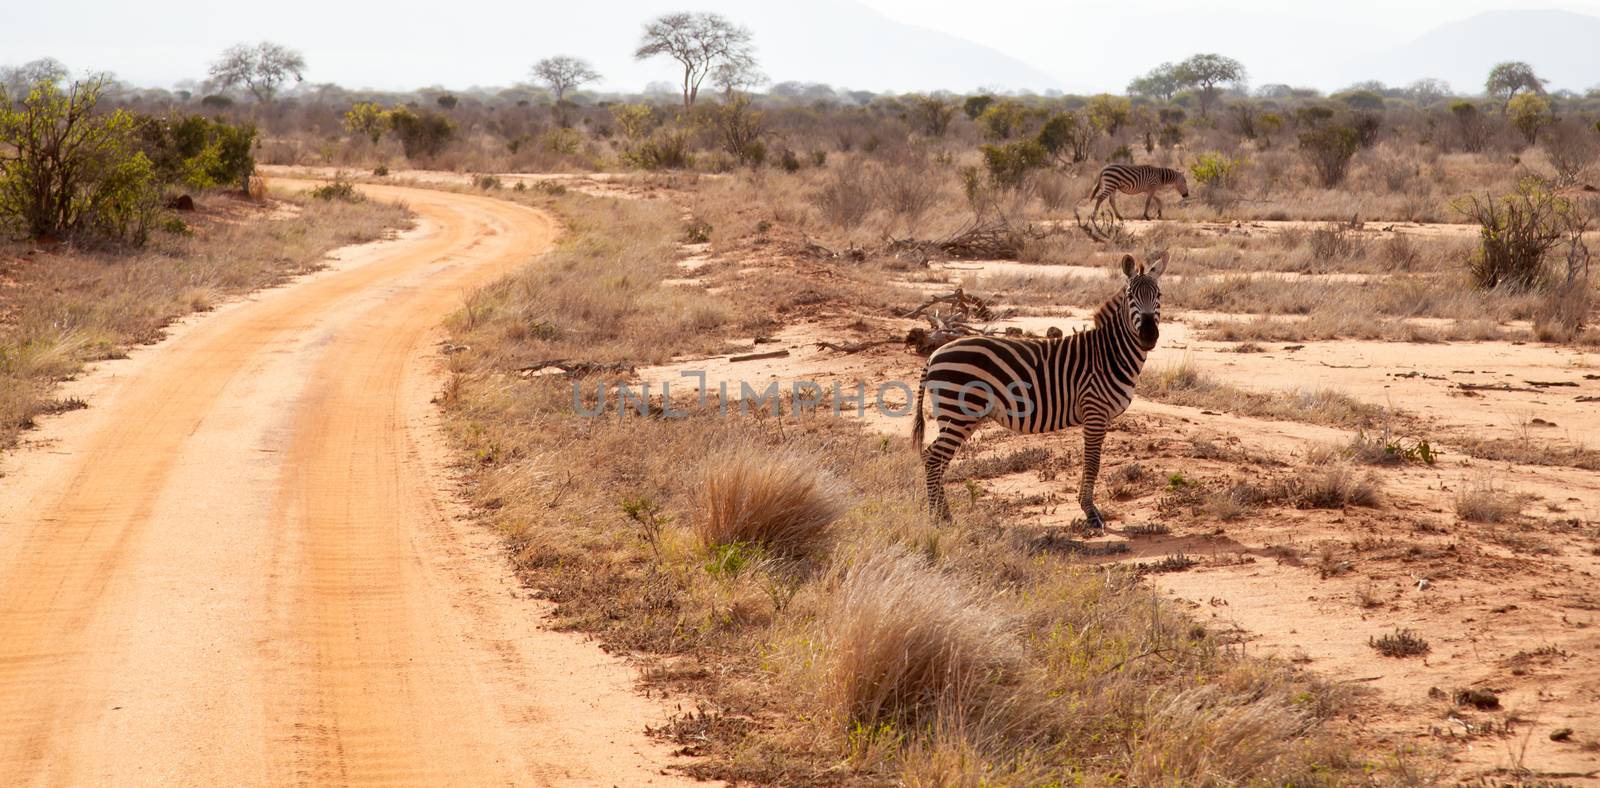 Zebra is standing by the road and watching, on safari in Kenya by 25ehaag6